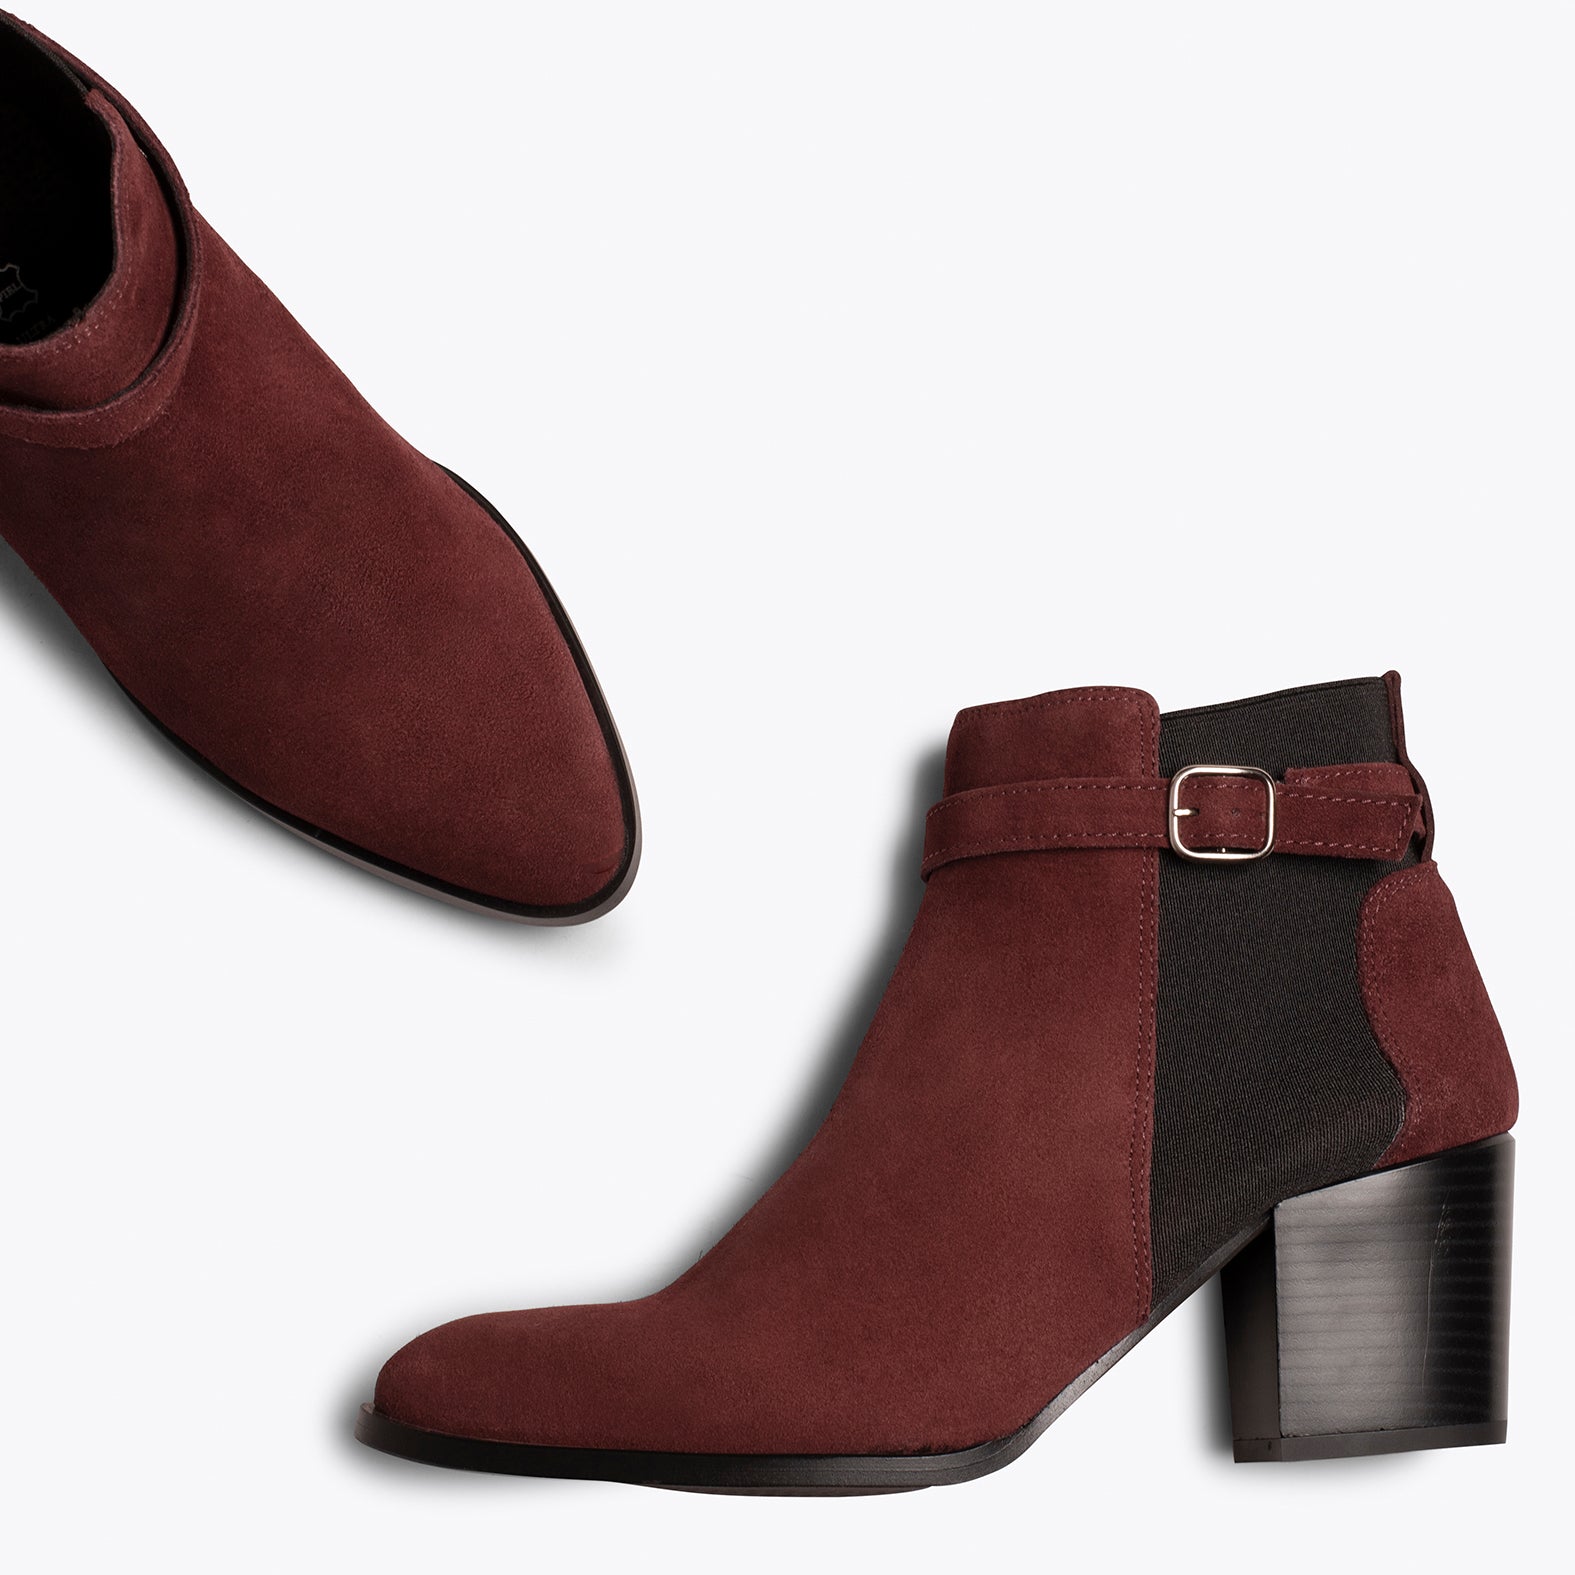 ELASTIC – BURGUNDY bootie with elastic side bands